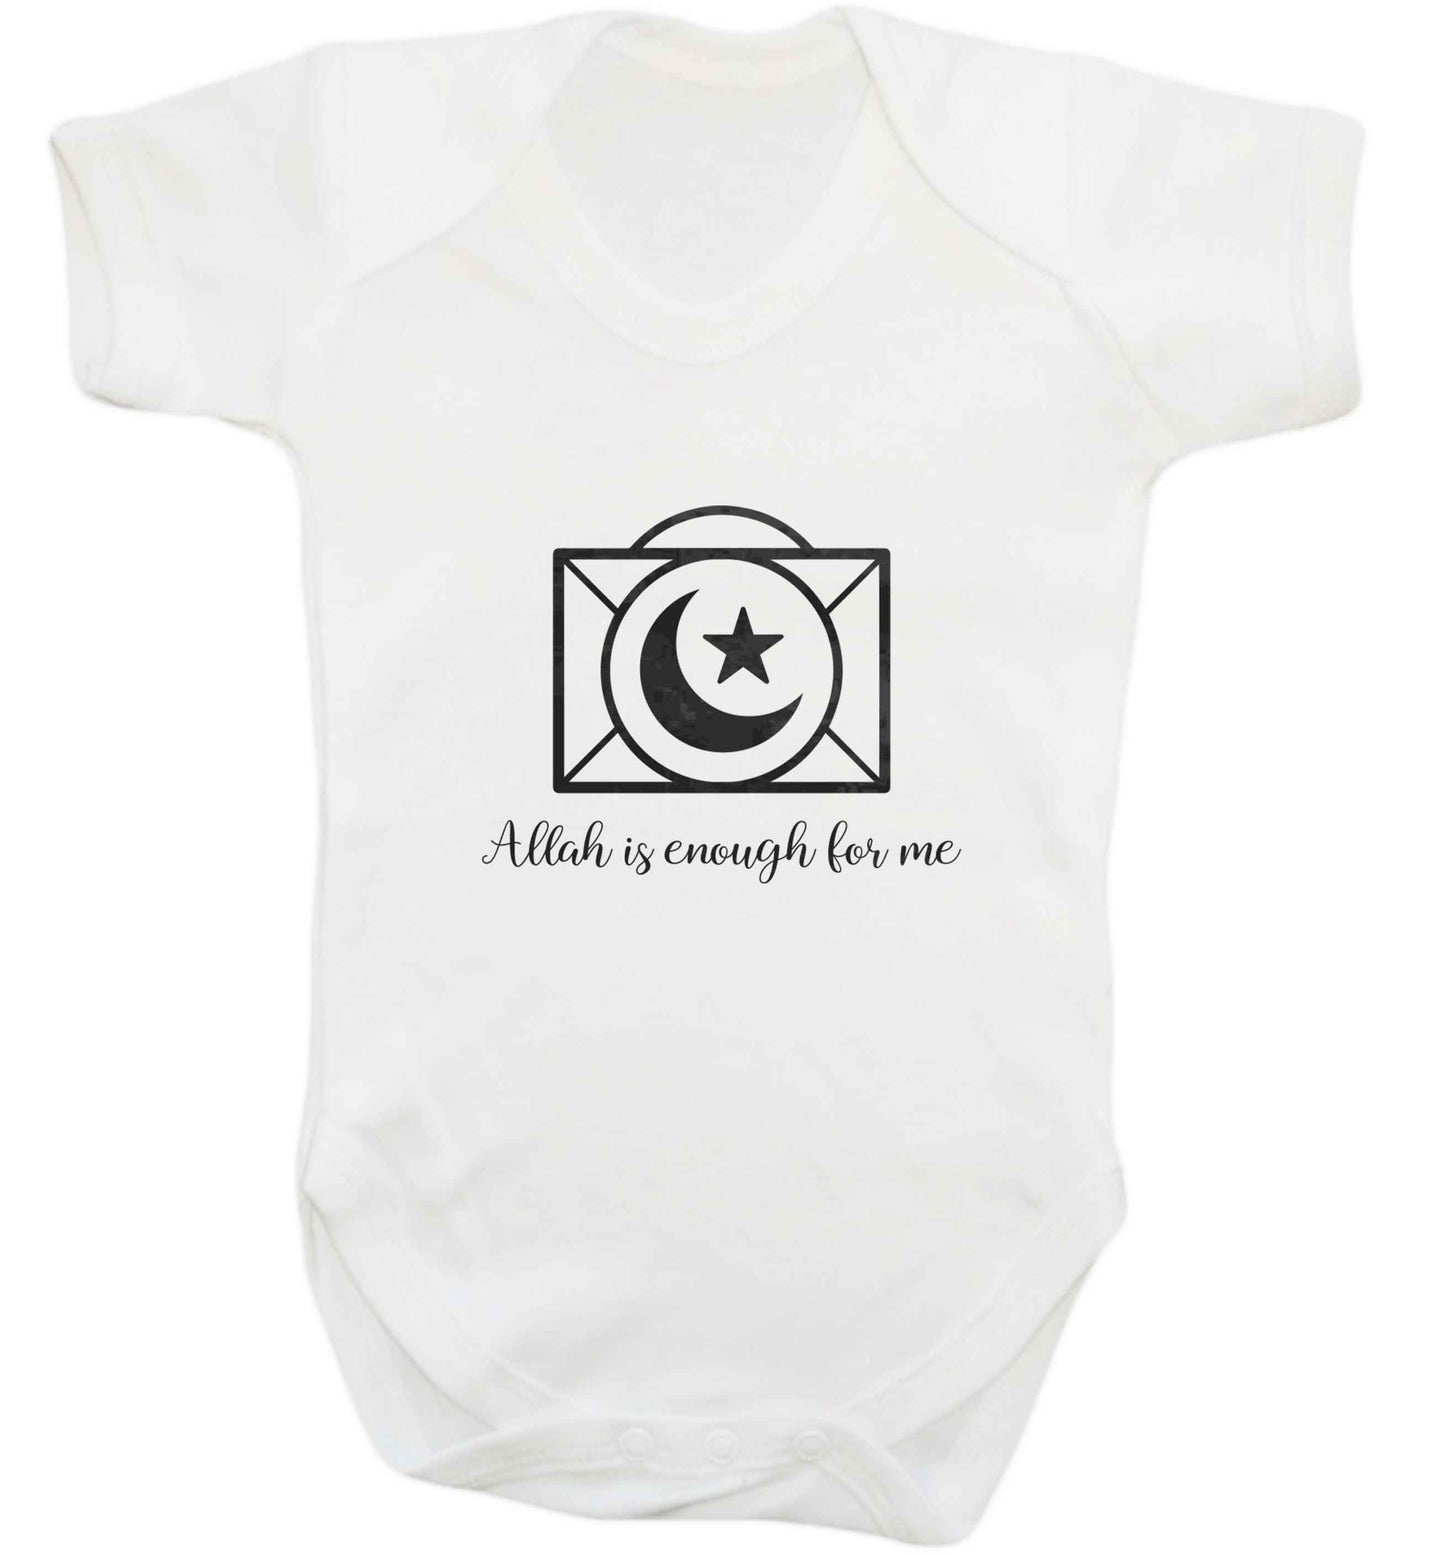 Allah is enough for me baby vest white 18-24 months